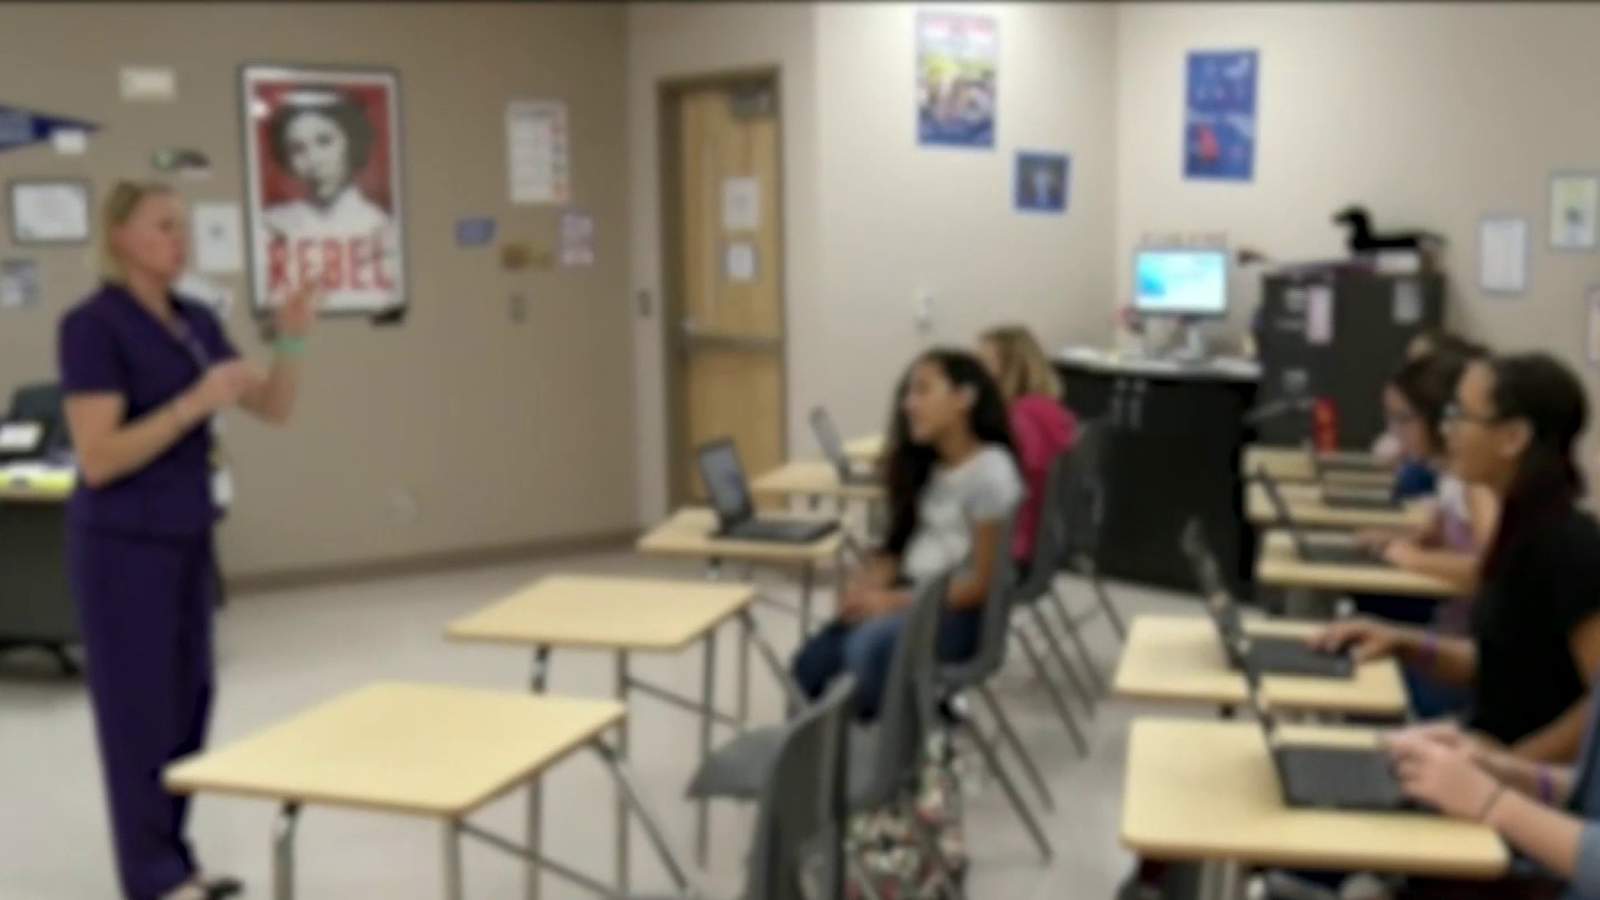 Florida schools to ‘stay the course’ following CDC guidance on reopening schools, education commissioner says